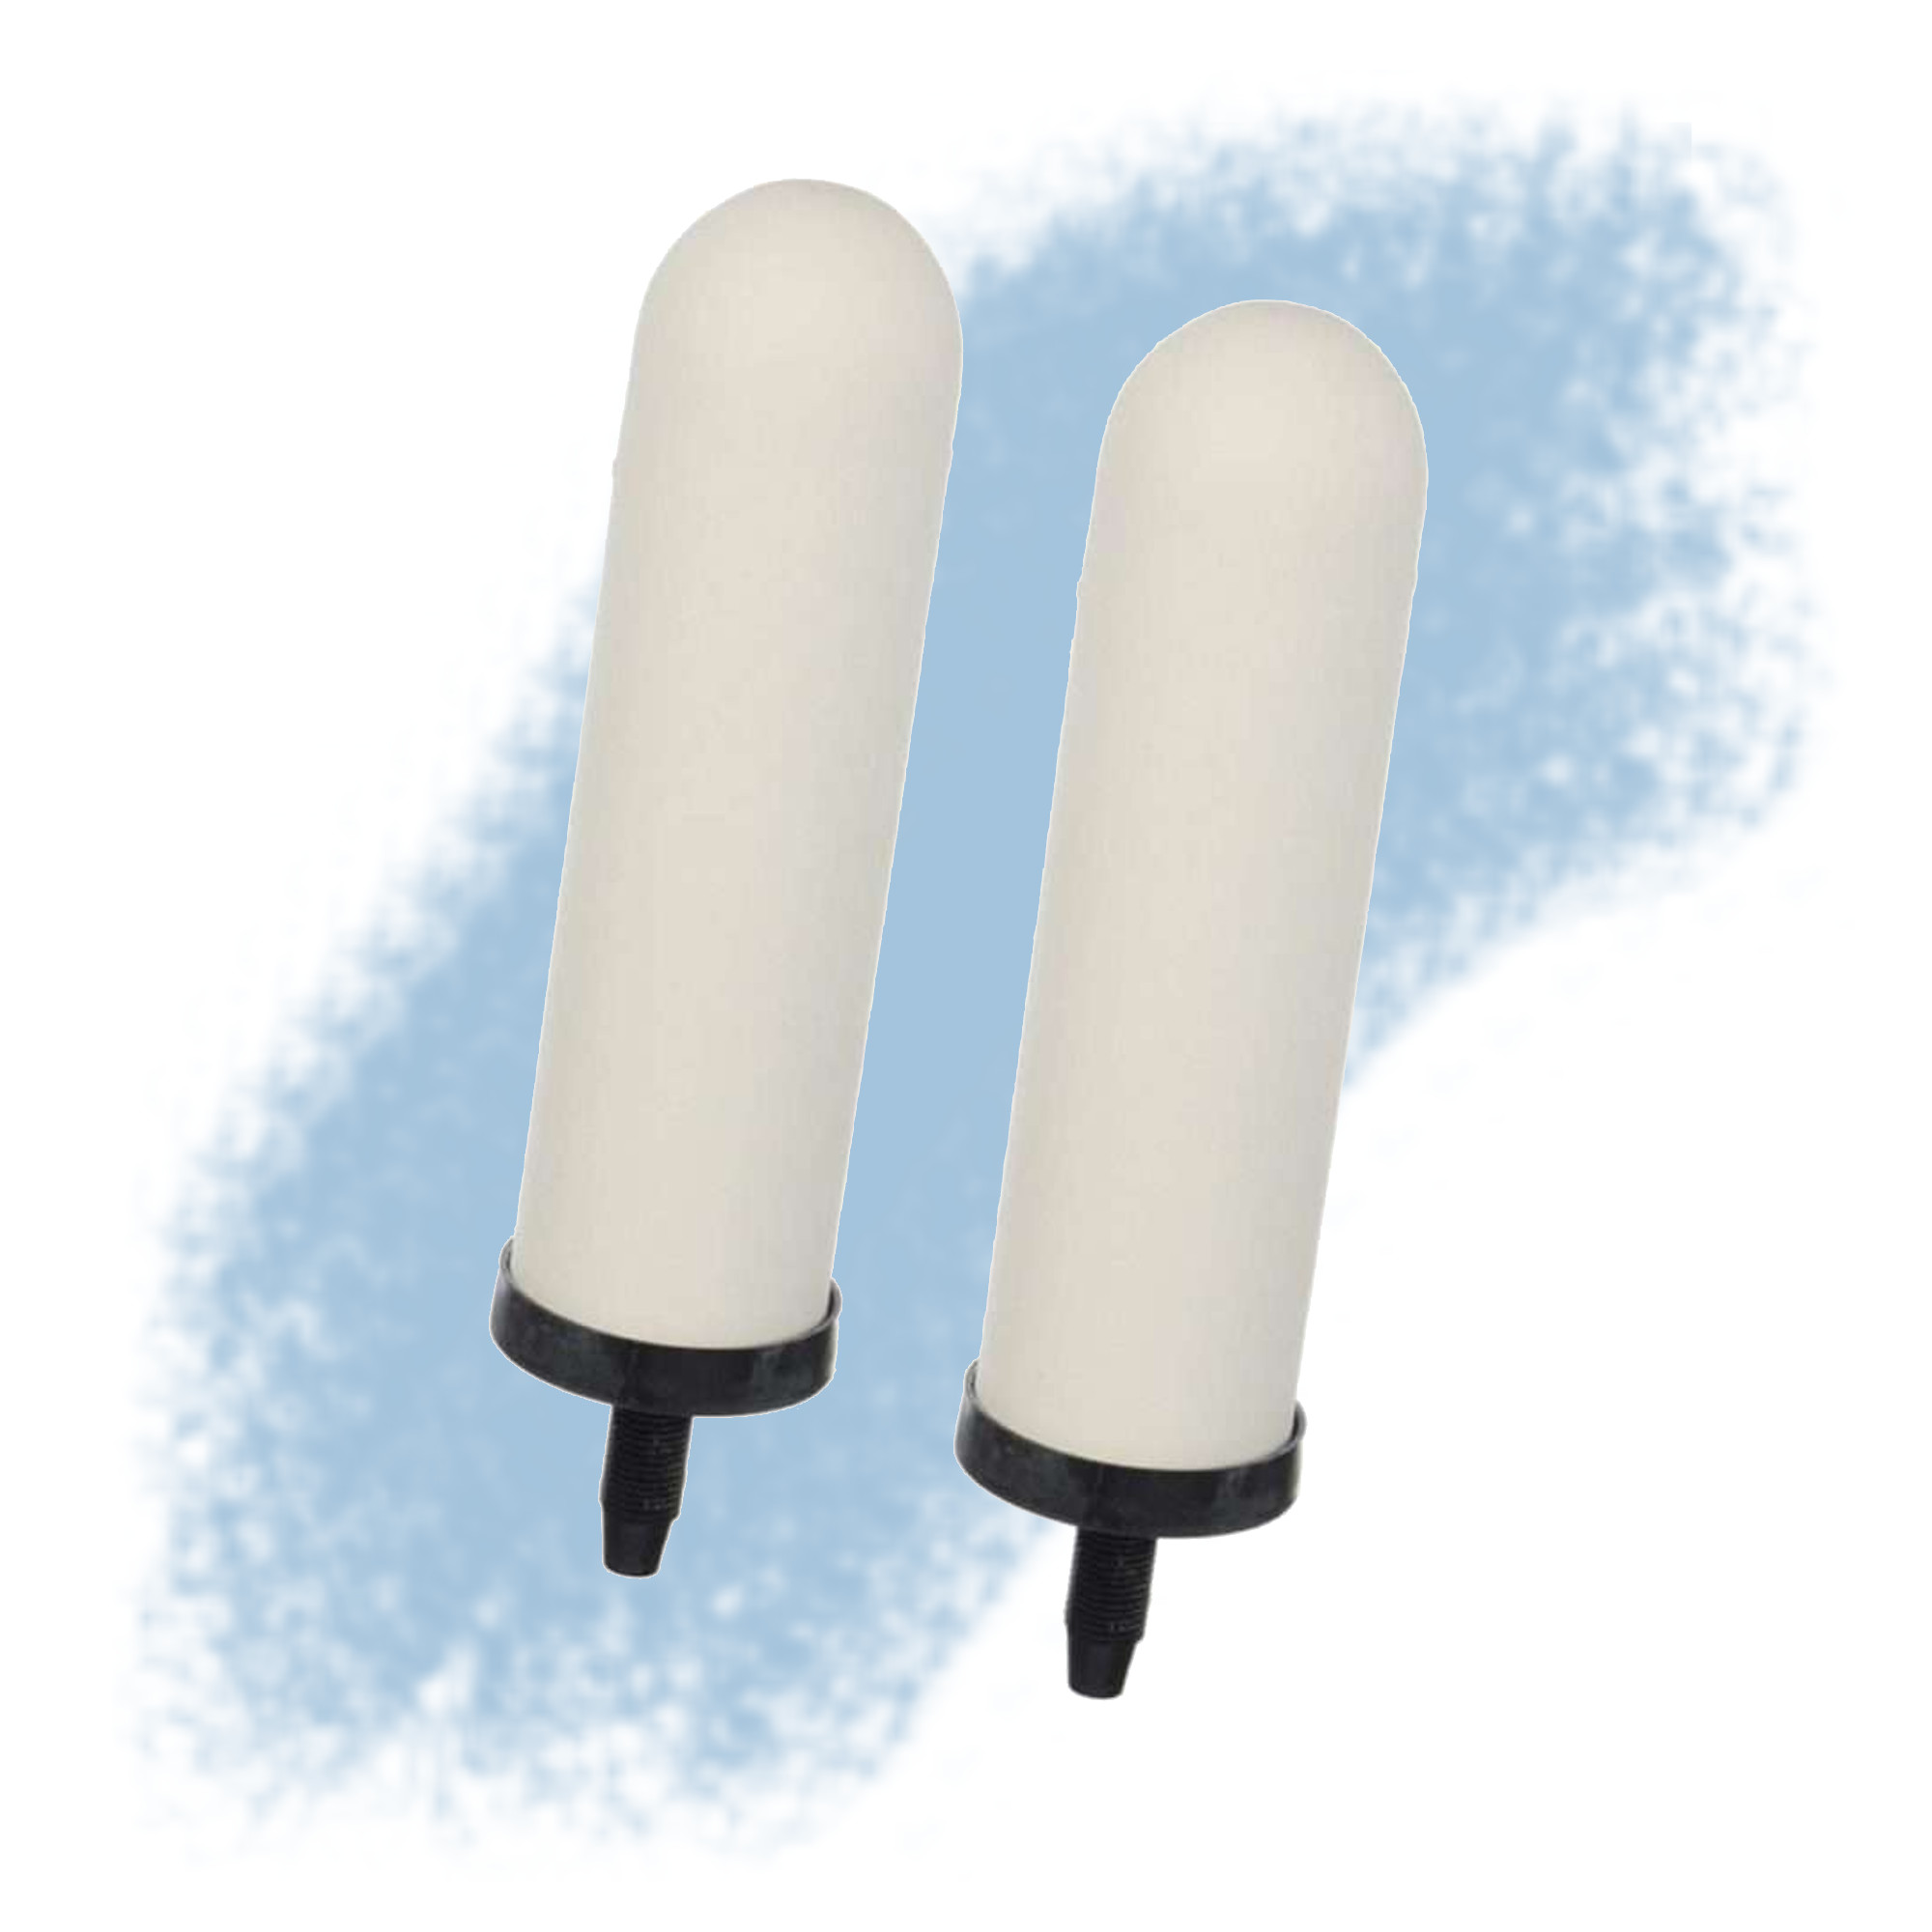 Buy A Two 7 Super Sterasyl Ceramic Replacement Filters